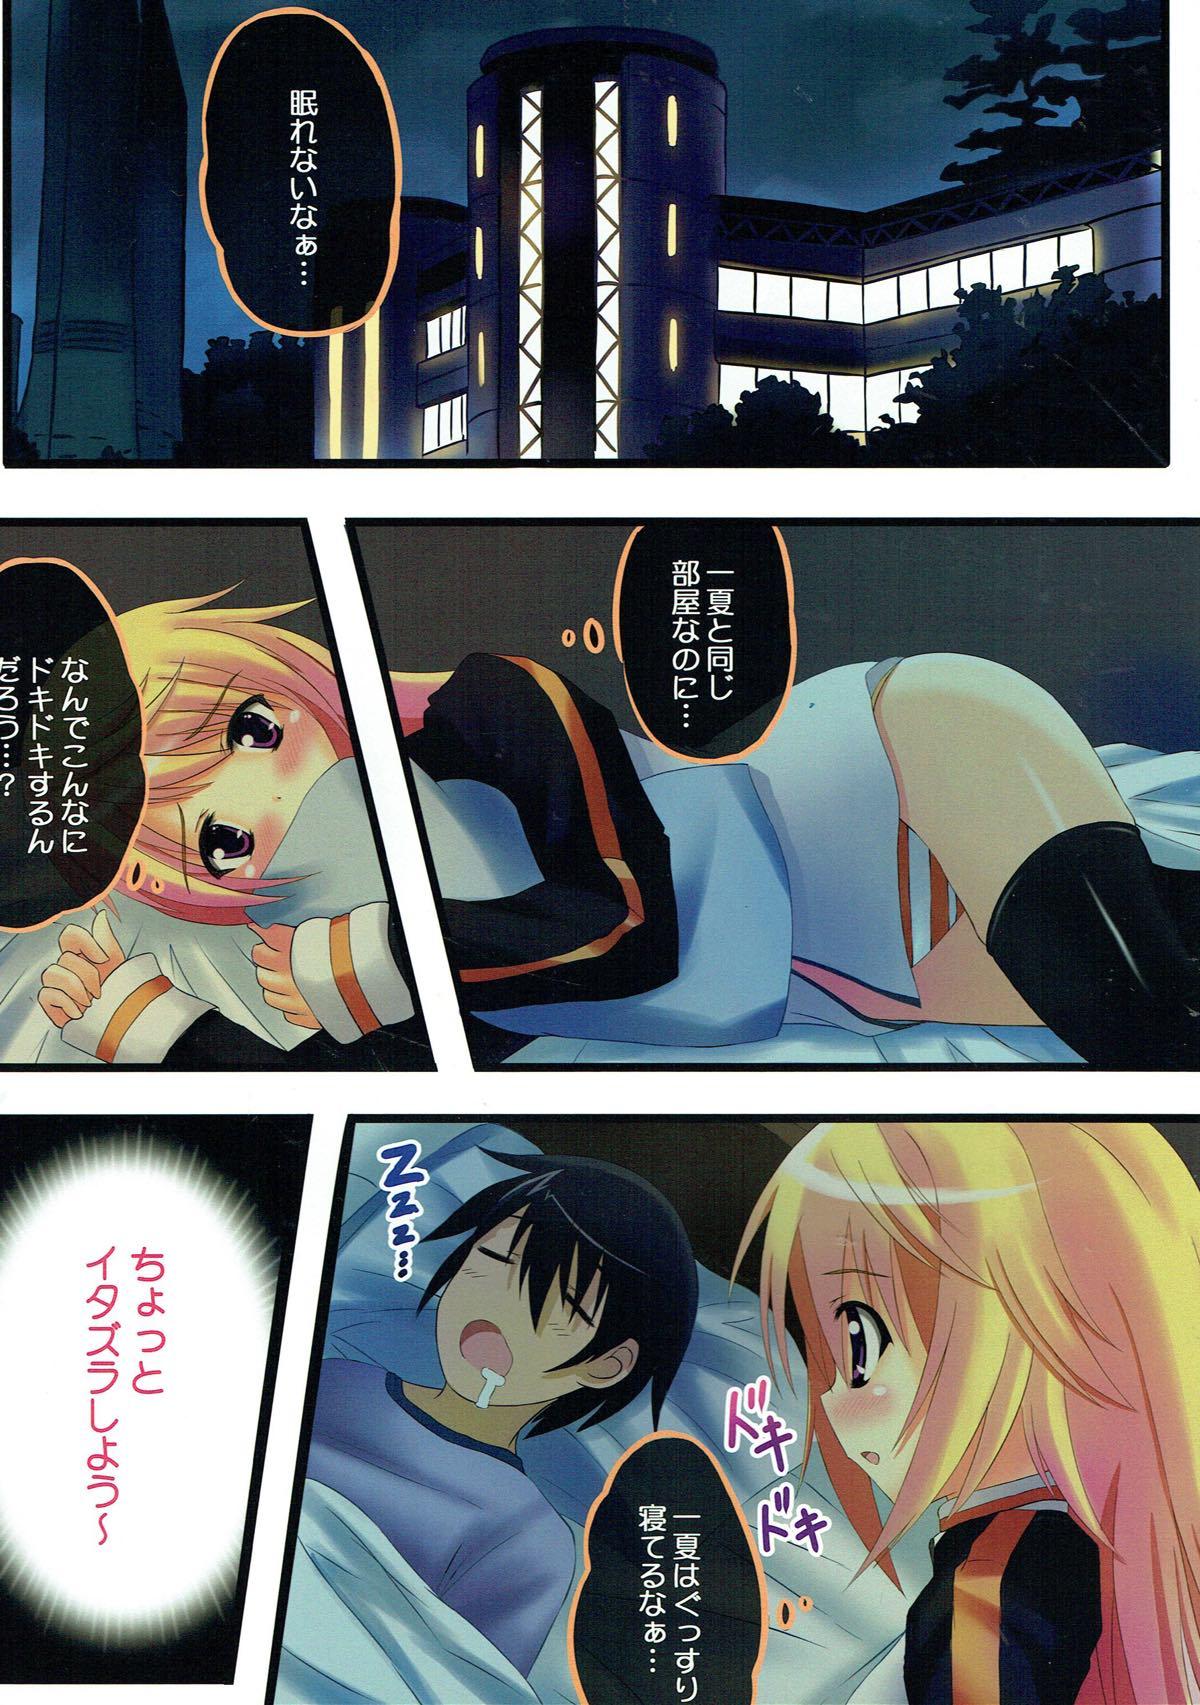 Real Amatuer Porn Char to Issho nara... Dame? - Infinite stratos Foreplay - Page 2